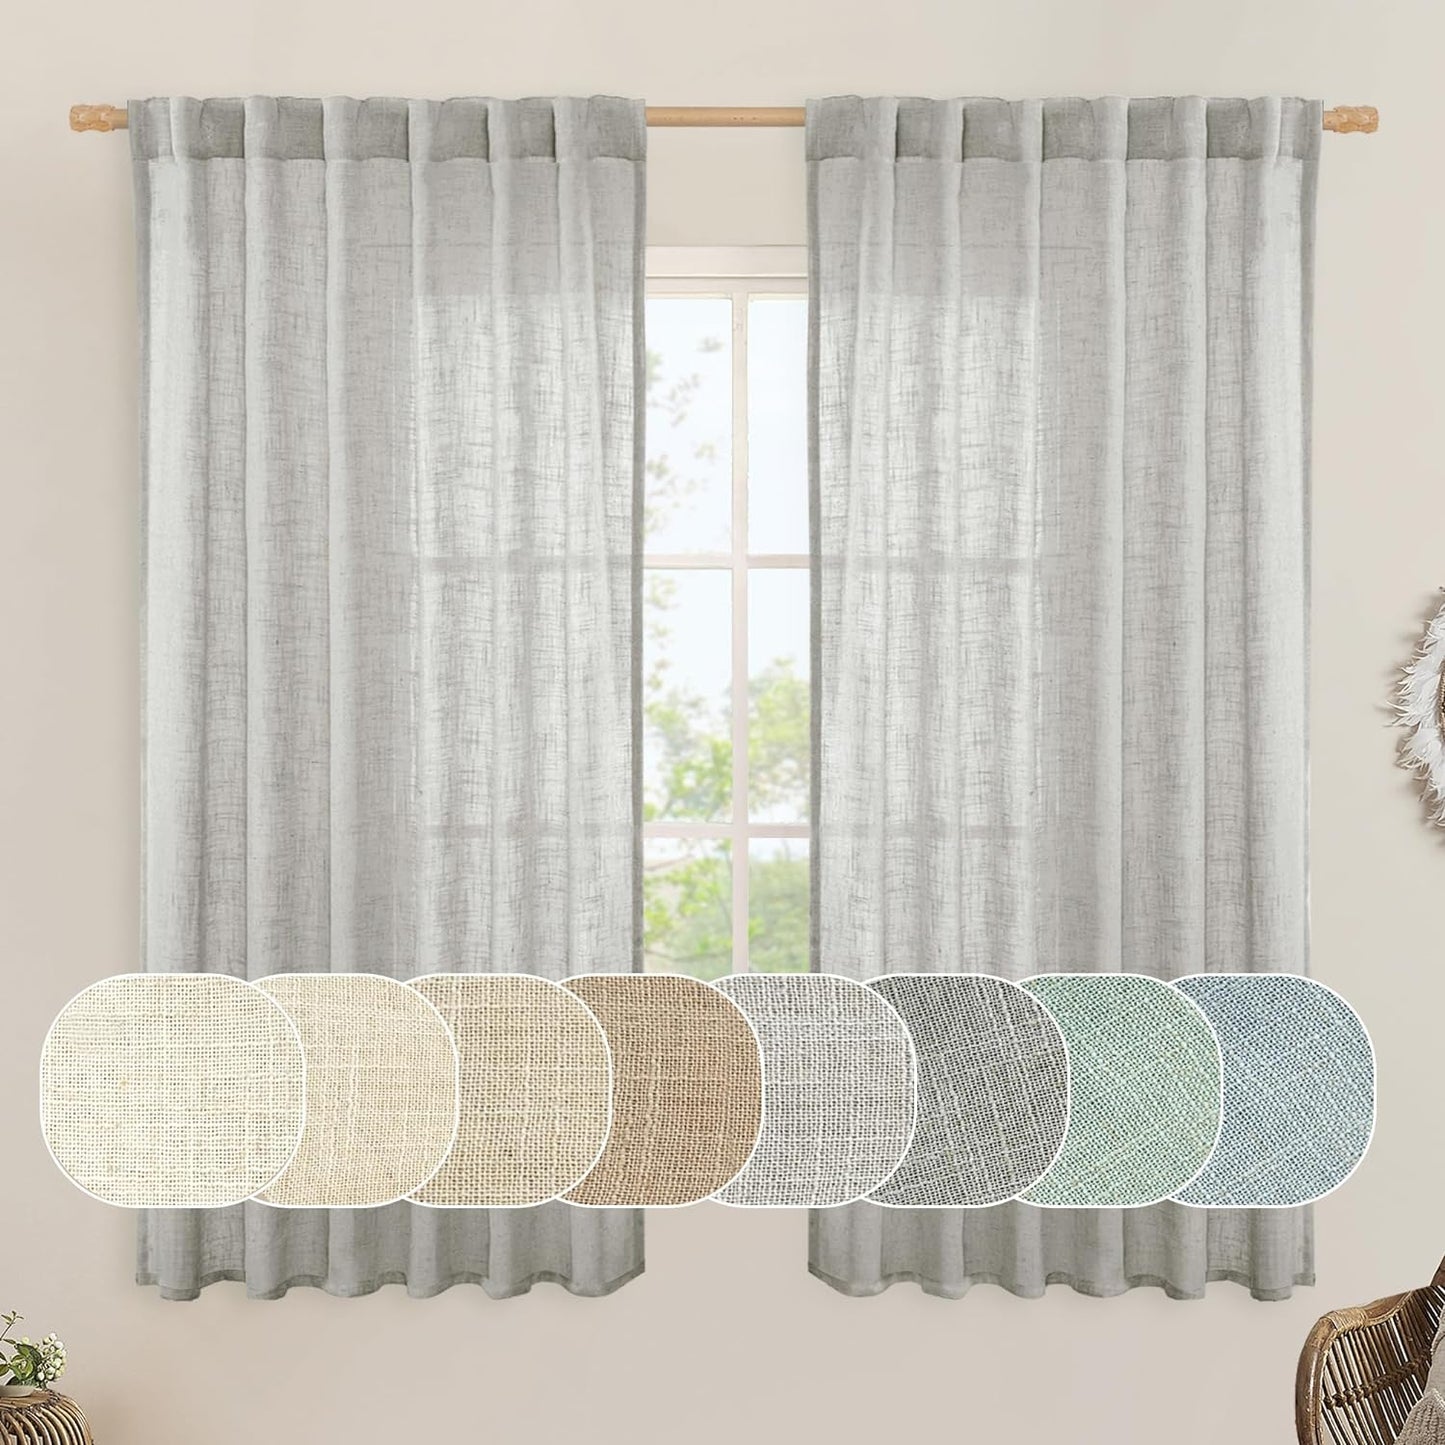 LAMIT Natural Linen Blended Curtains for Living Room, Back Tab and Rod Pocket Semi Sheer Curtains Light Filtering Country Rustic Drapes for Bedroom/Farmhouse, 2 Panels,52 X 108 Inch, Linen  LAMIT Light Grey 52W X 63L 